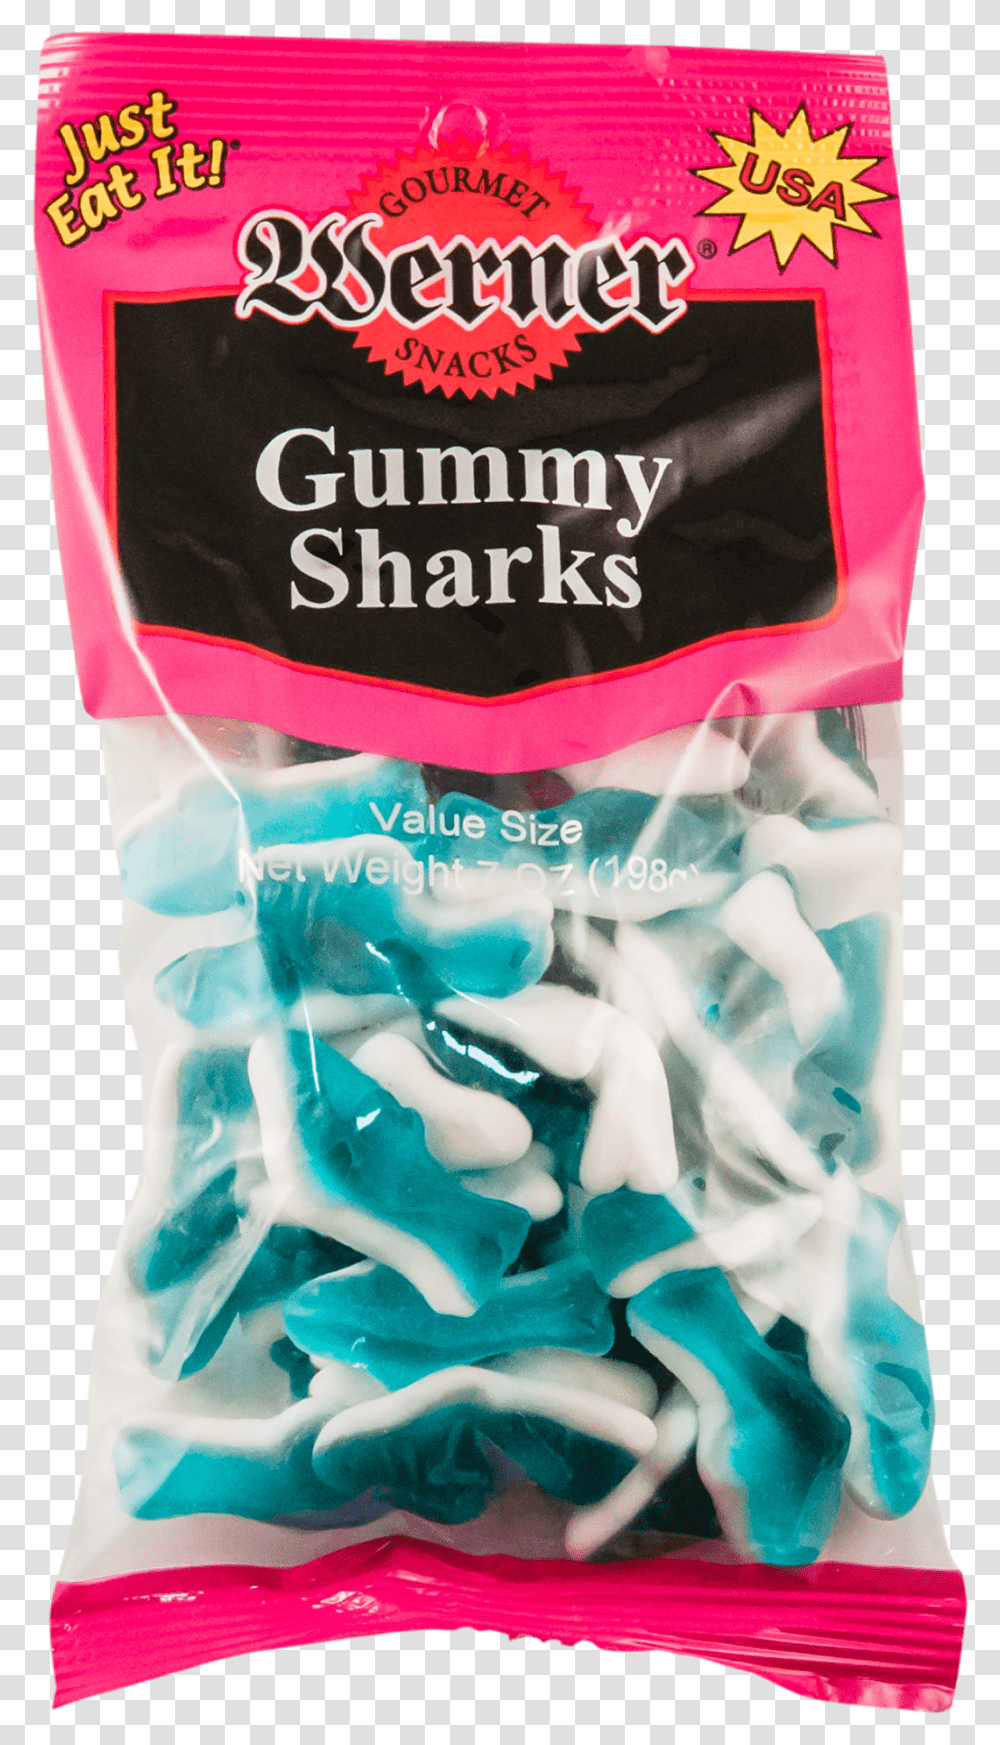 Gummy SharksClass Farfalle, Sweets, Food, Confectionery, Poster Transparent Png